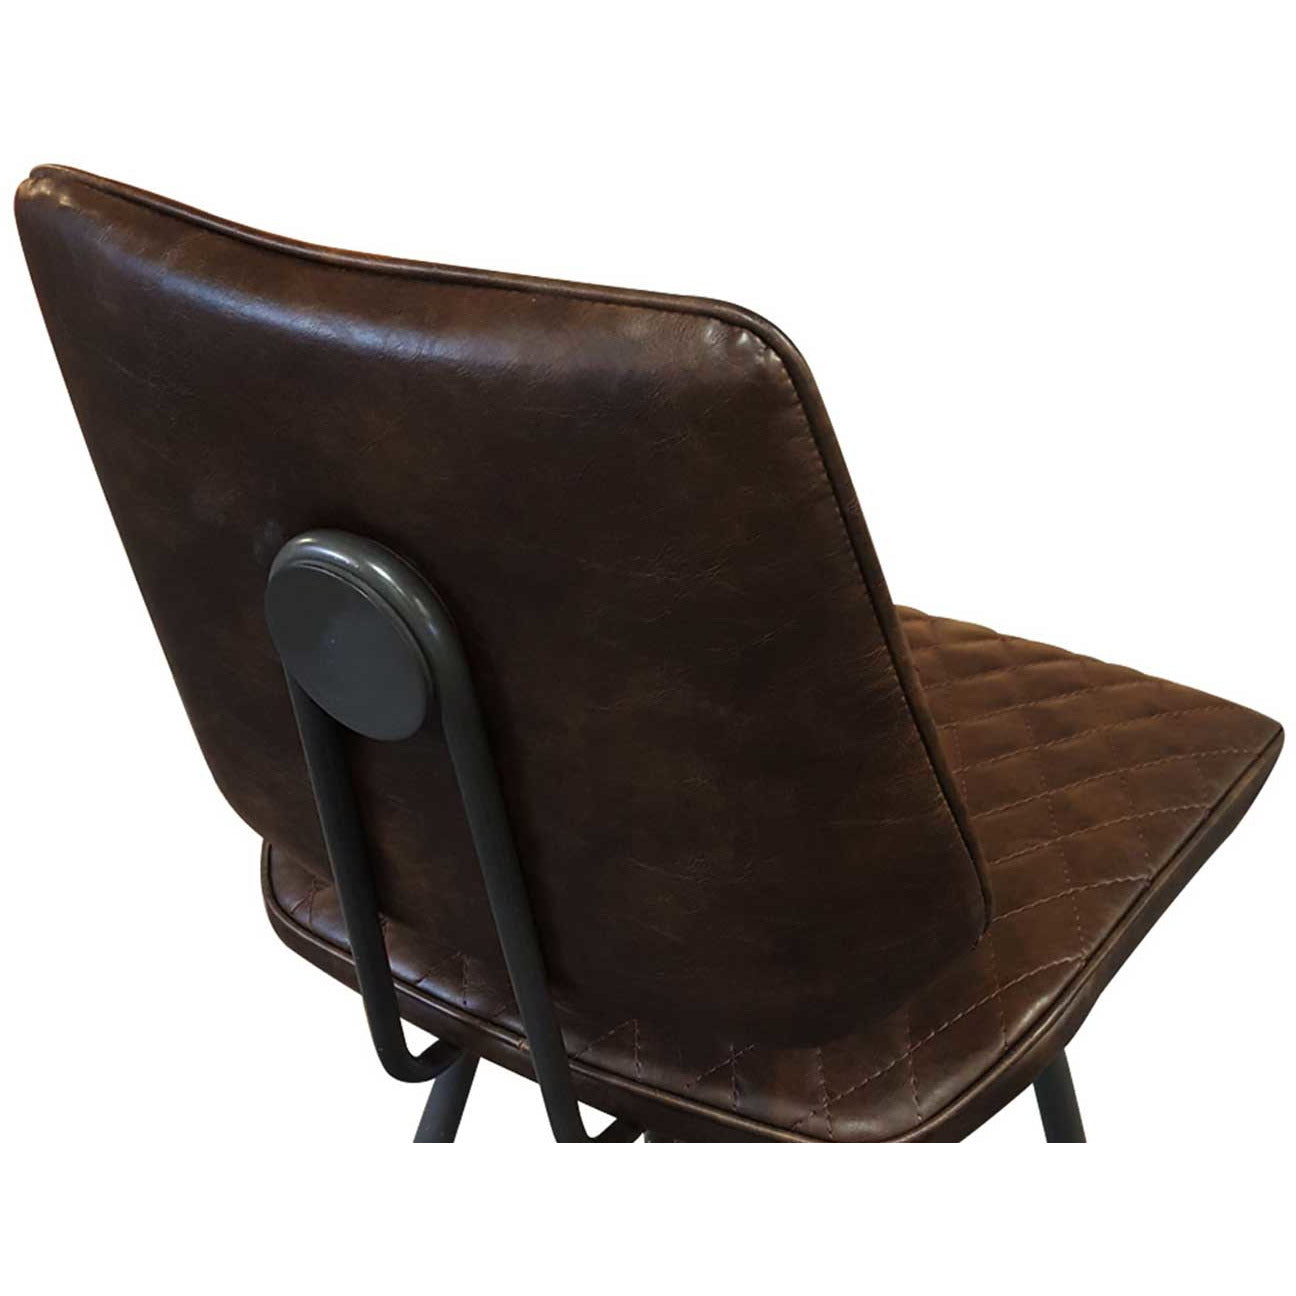 Brown leather dining chair rustic dining chair